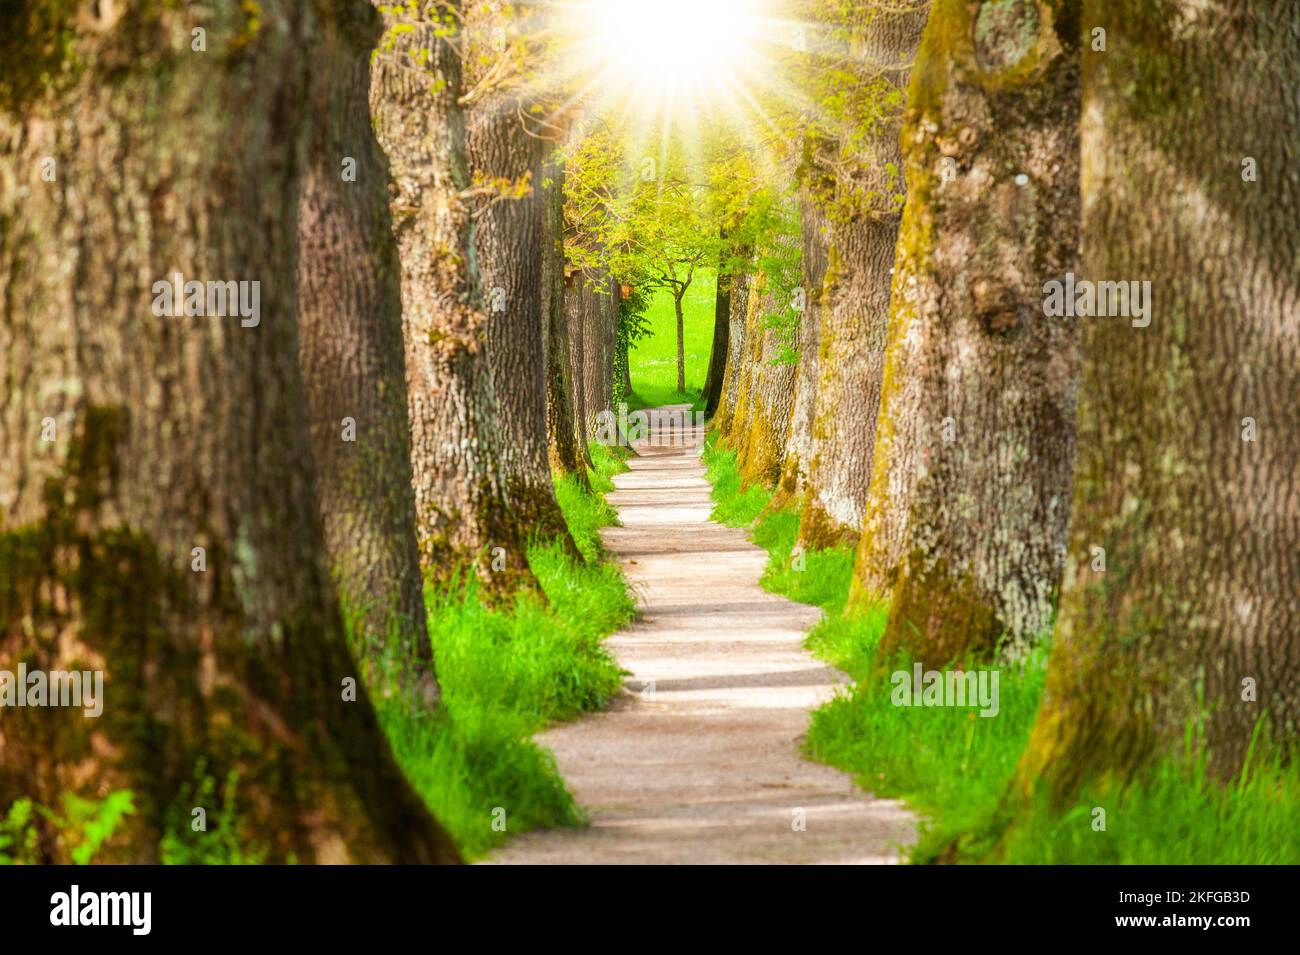 Tree alley with footpath and sunbeams Stock Photo